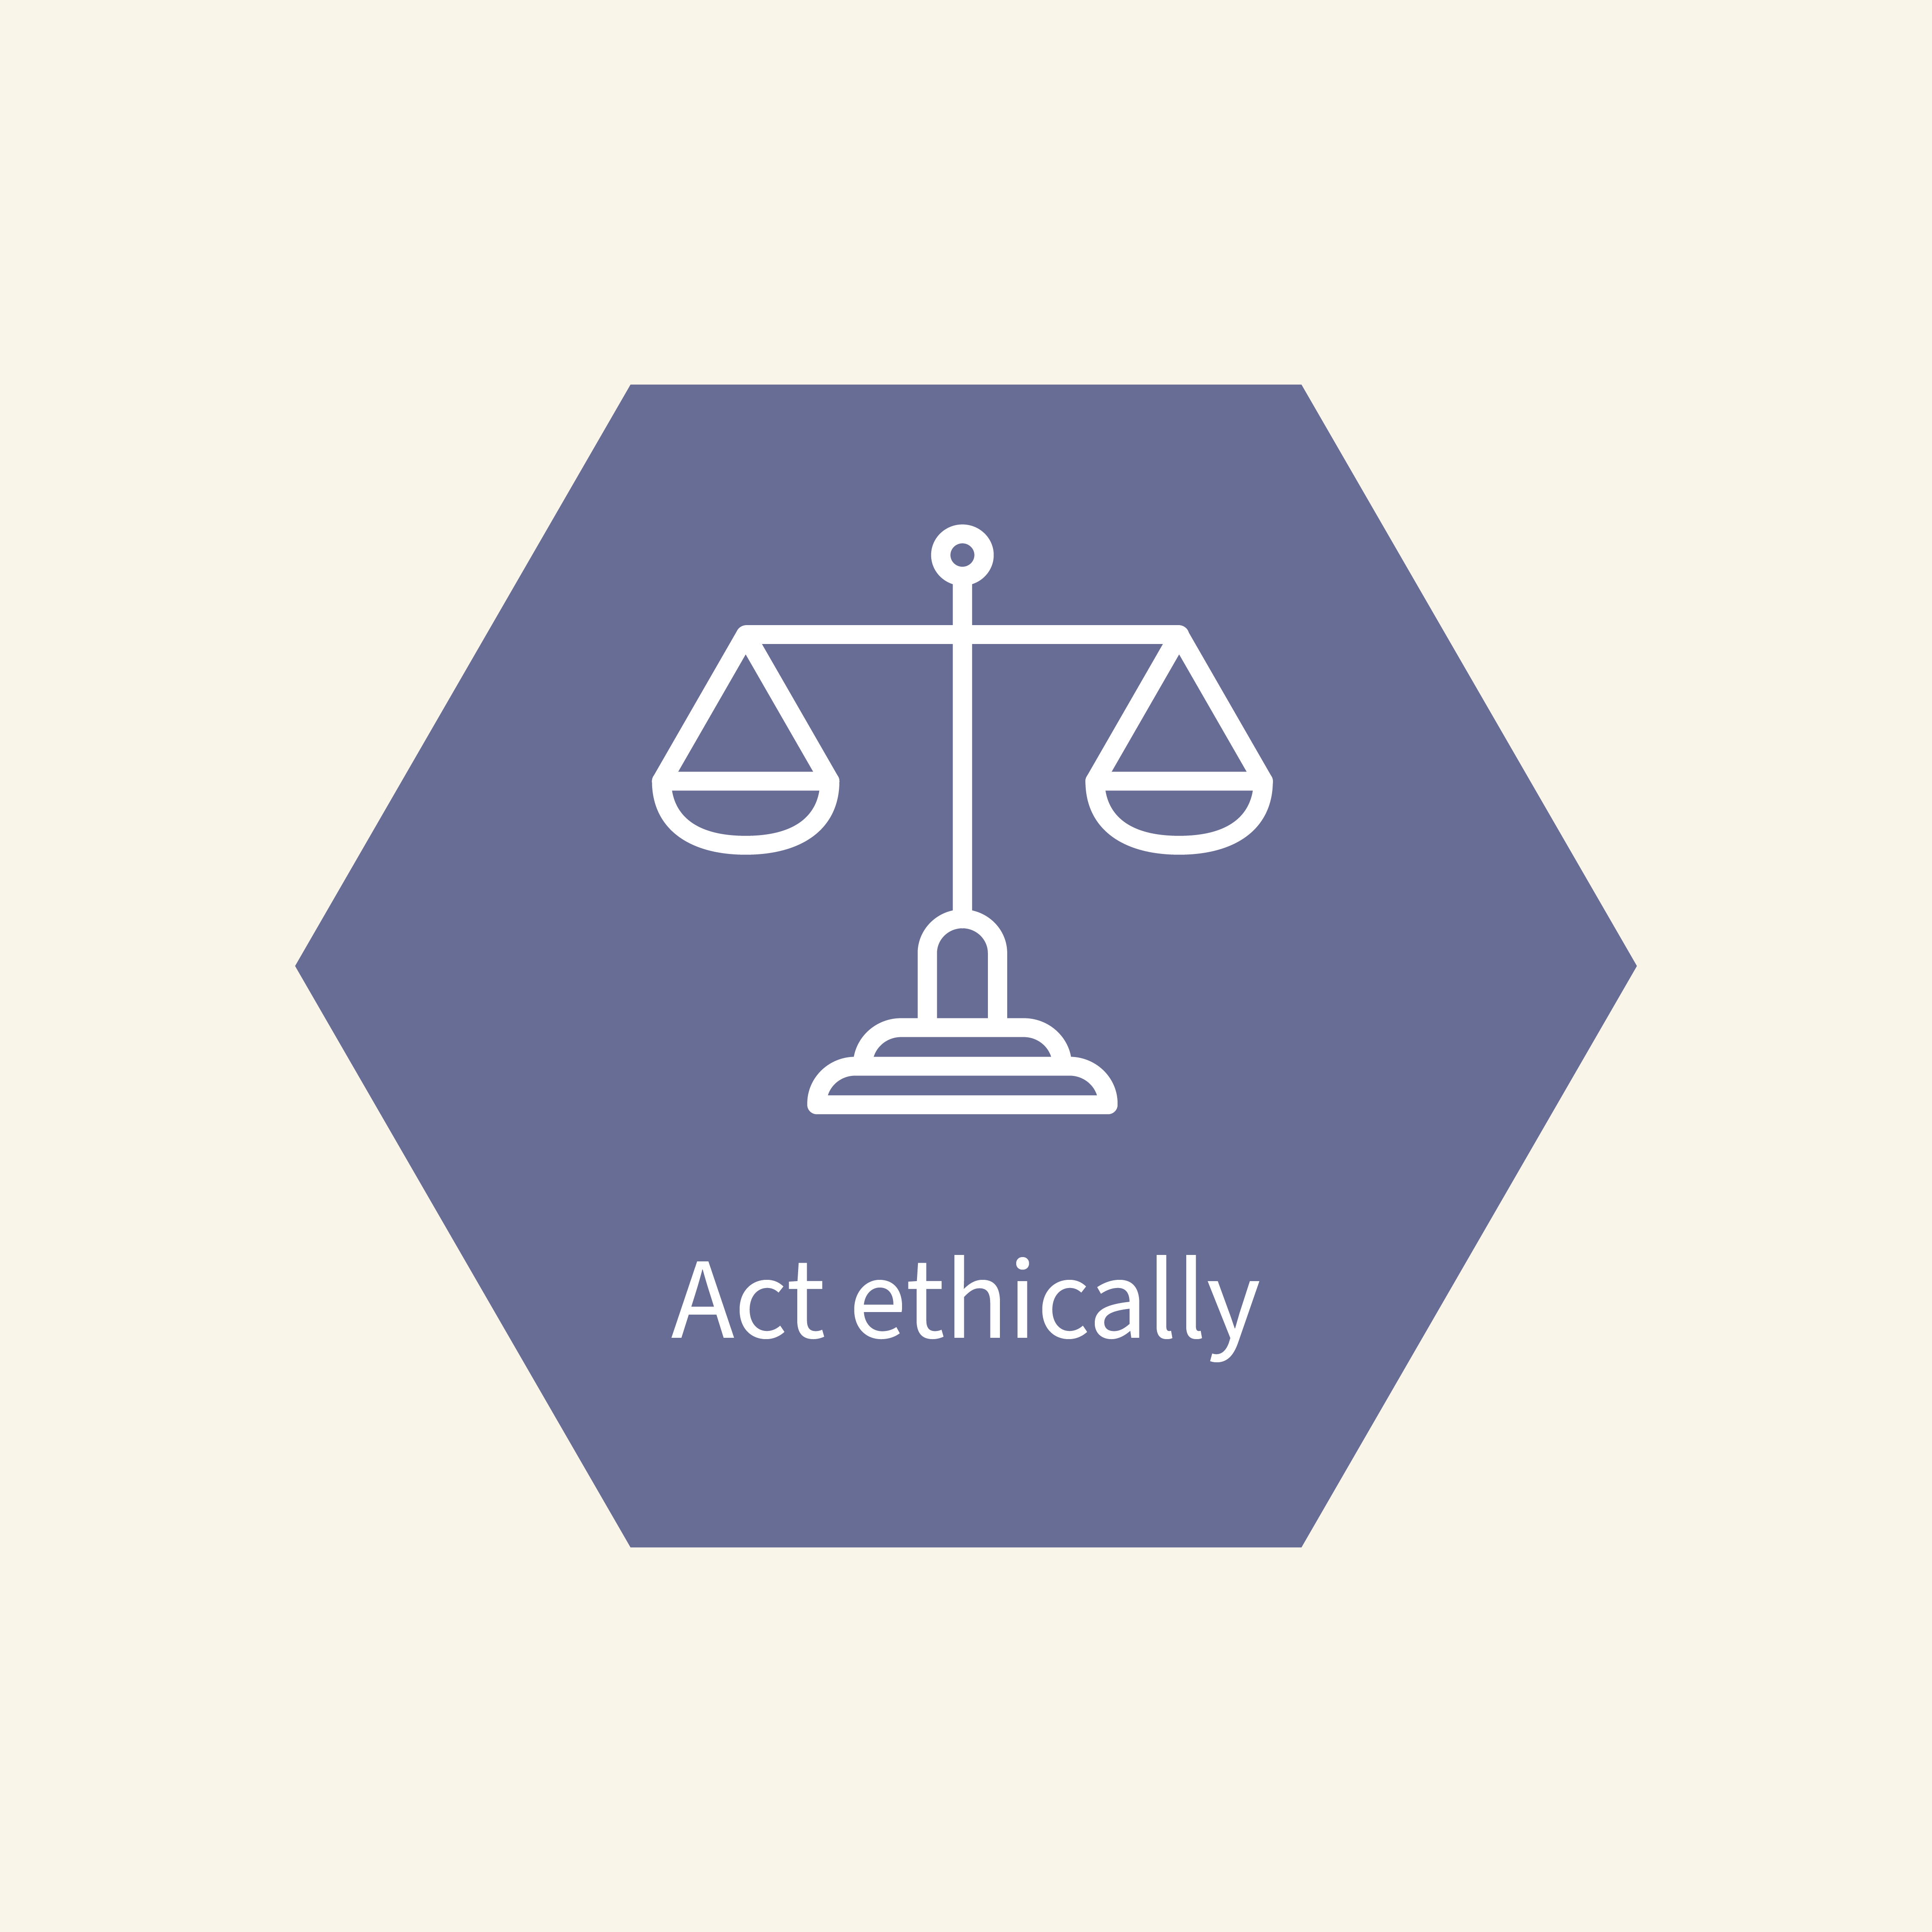 Act ethically